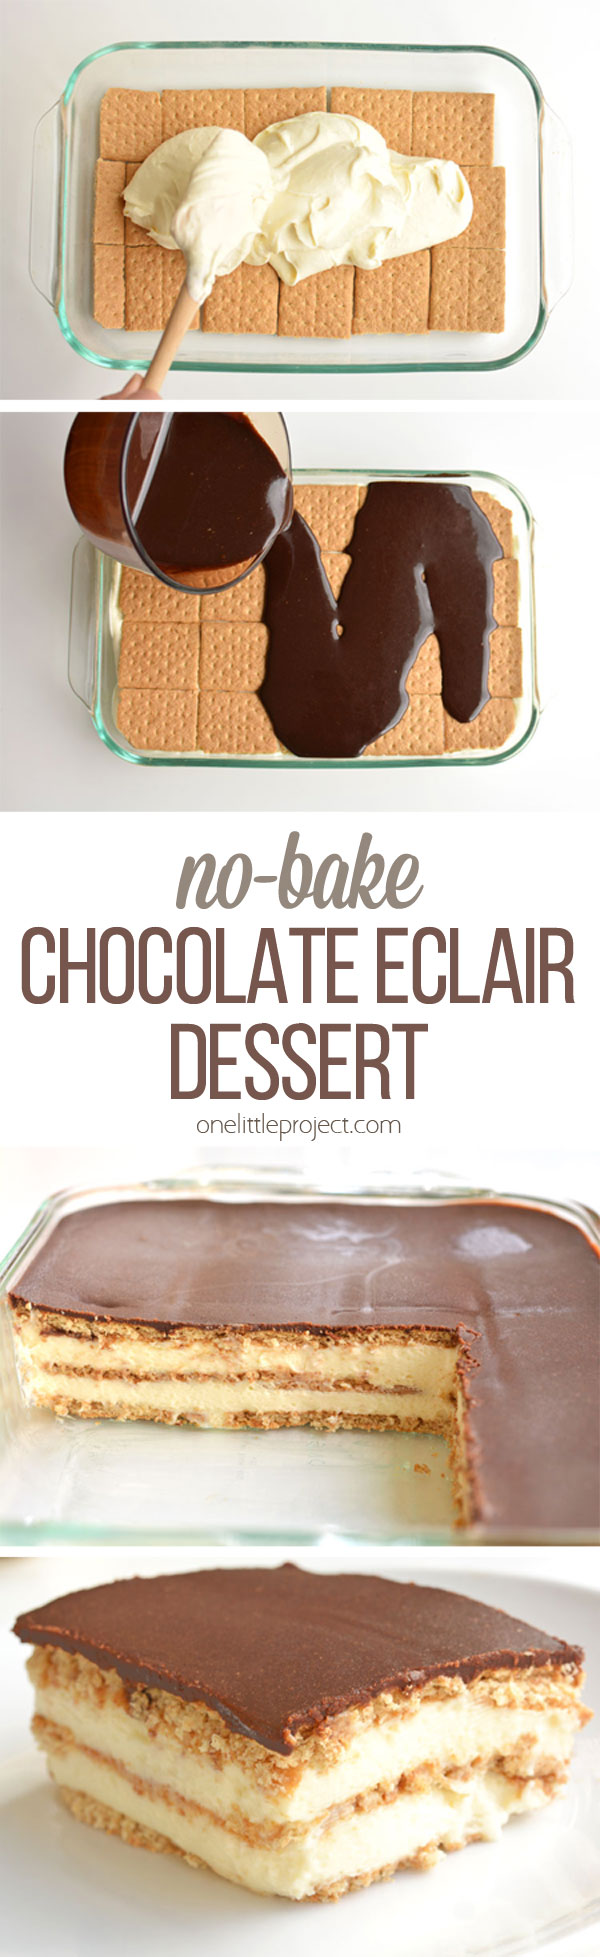 This chocolate eclair cake is such an easy dessert! And it tastes AMAZING with its creamy and delicious layers!! Just like a chocolate eclair, but in a cake. Mmmmm... 